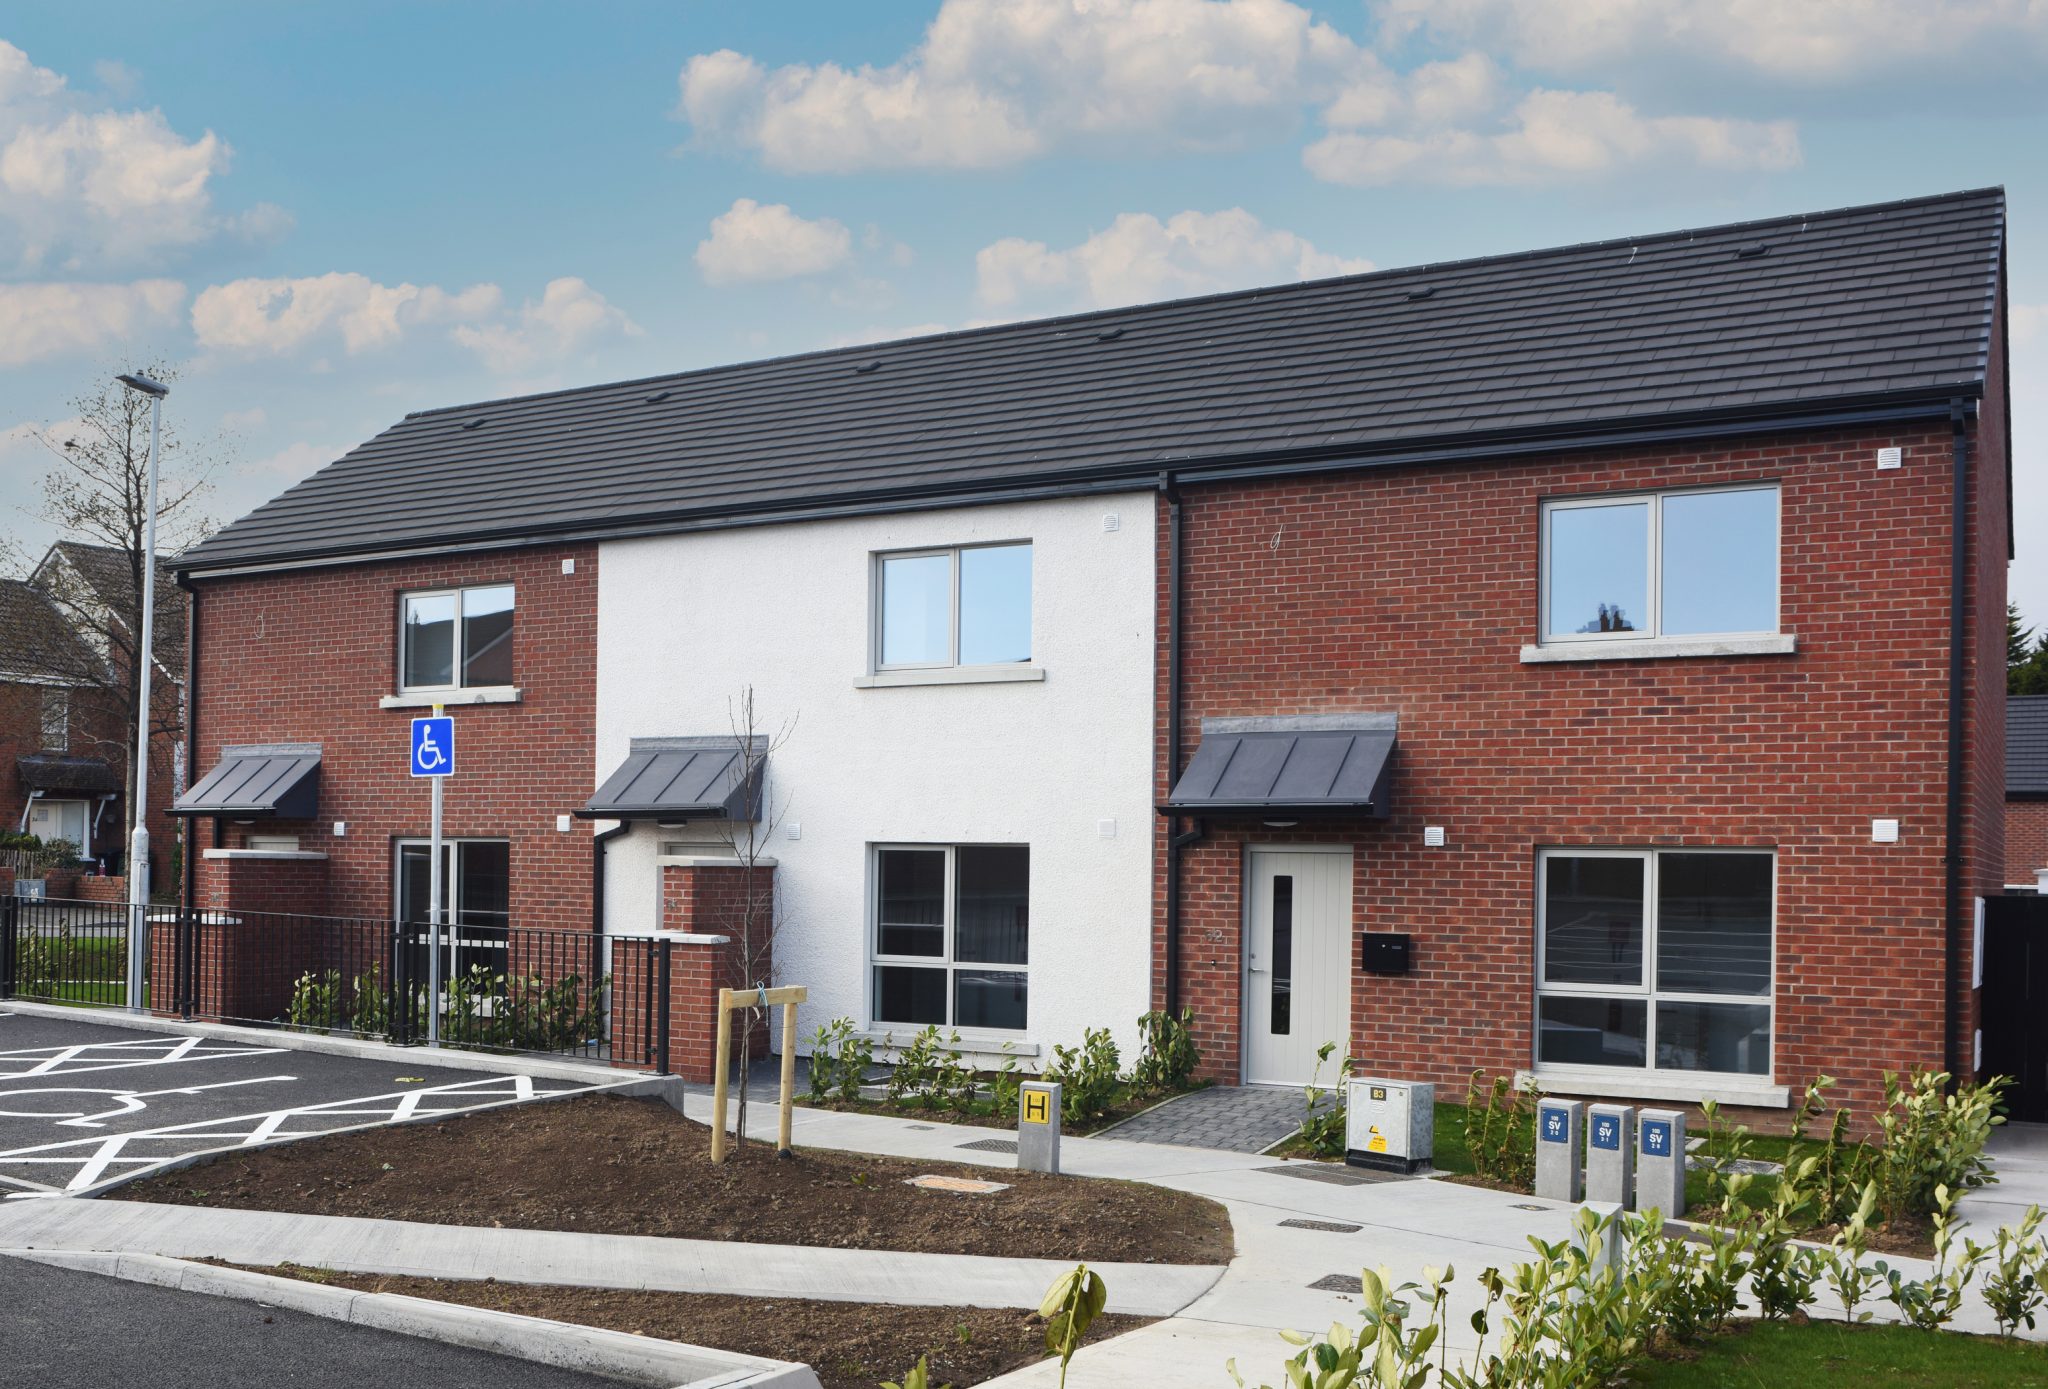 Successful completion of residential development at Ard na Greine, Bray, Co. Wicklow